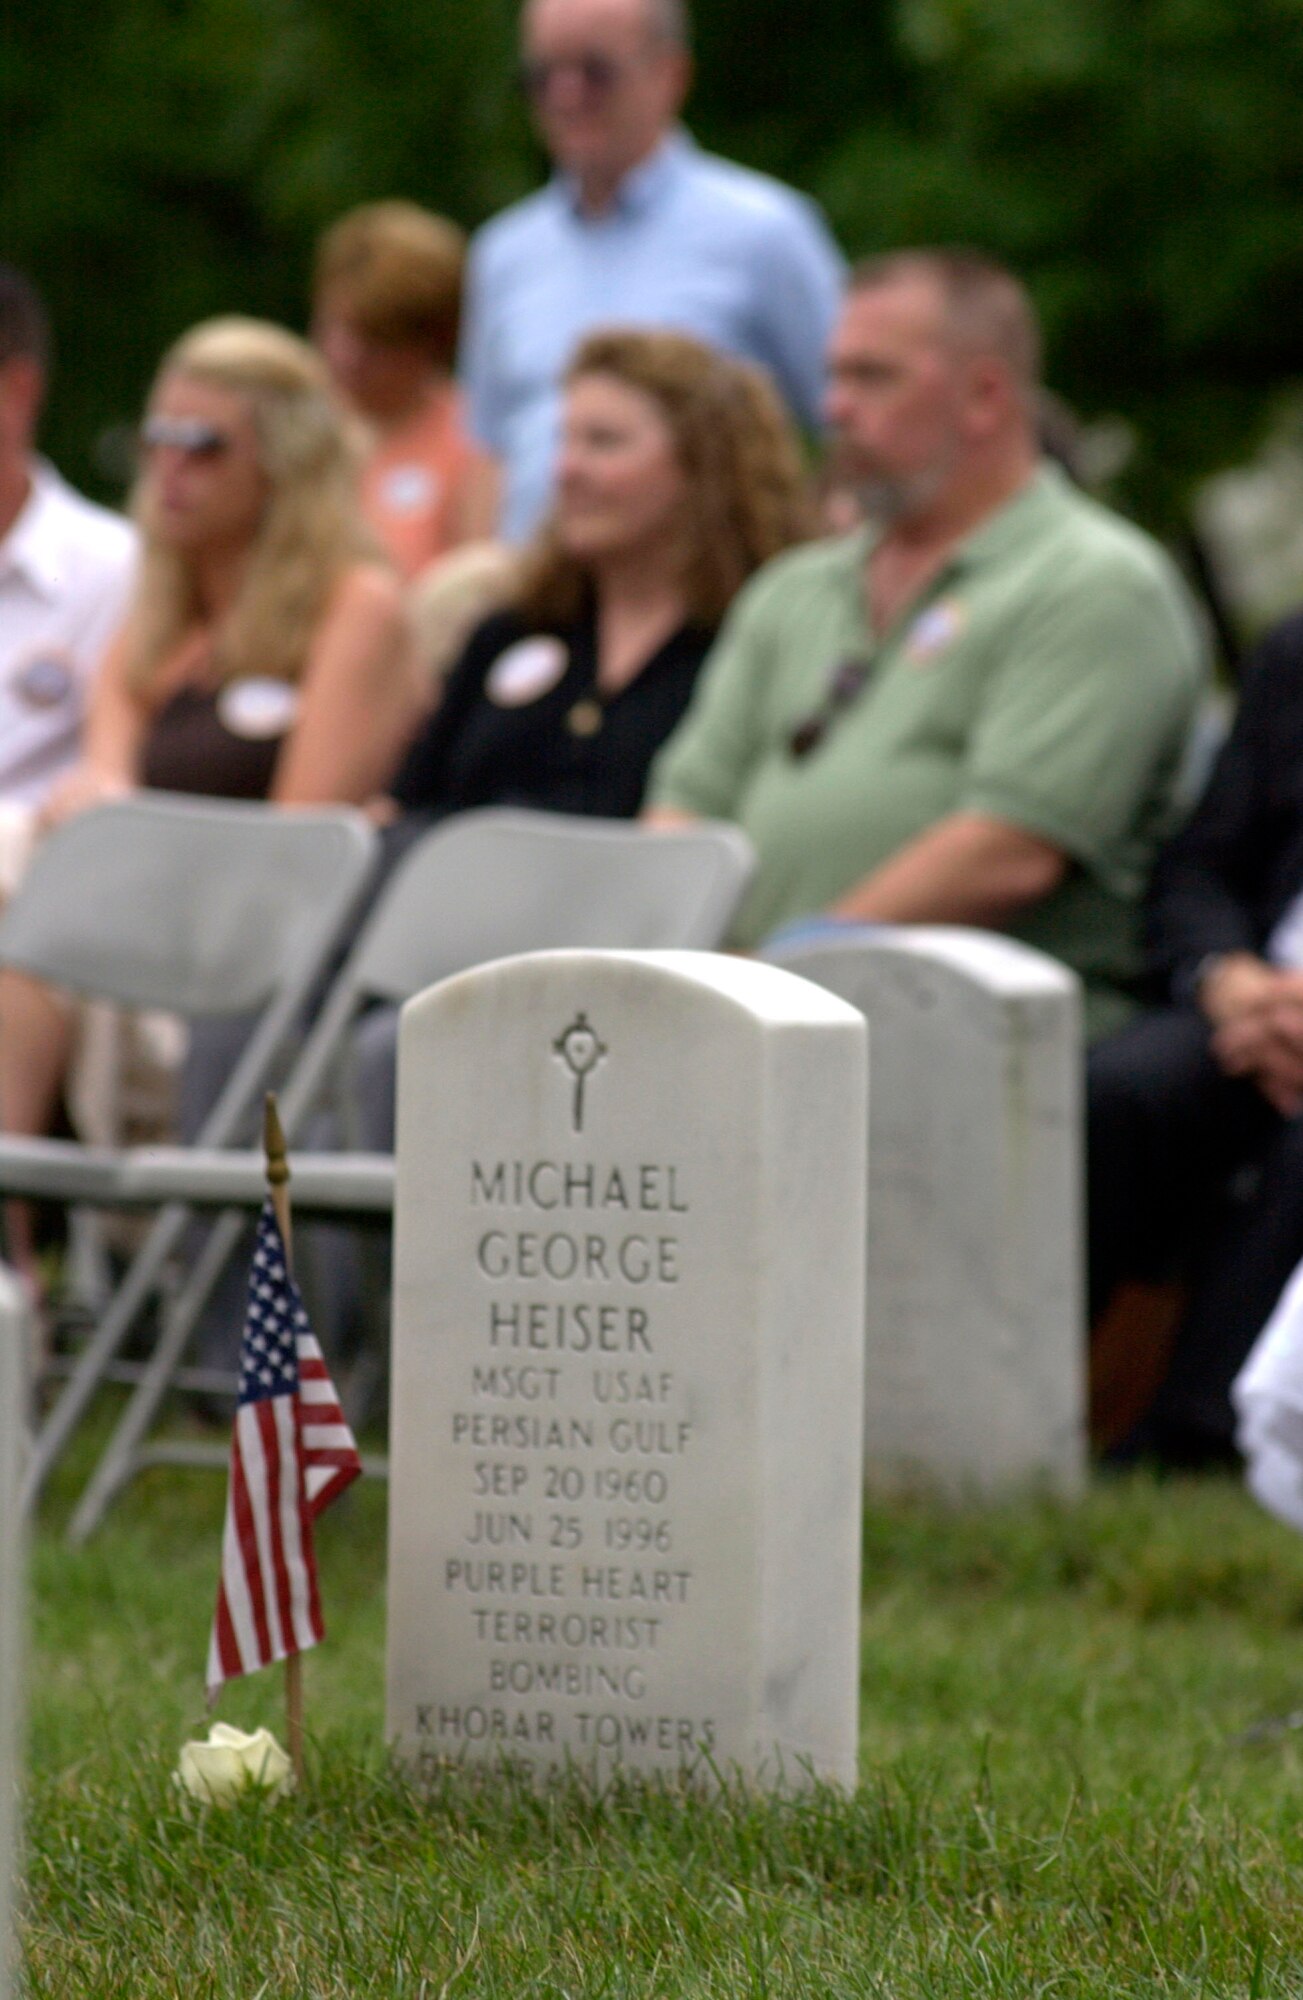 The headstone of Master Sgt. Michael George Heiser rests at Arlington National Cemetery, Va., near family members and friends gathered at a remembrance ceremony on Sunday, June 25, marking the 10th anniversary of the Khobar Towers bombing.  Nineteen Airmen were killed in the terrorist bombing at Dhahran Air Base, Saudi Arabia, on June 25, 1996.   (U.S. Air Force photo/Tech. Sgt. Cohen A. Young) 